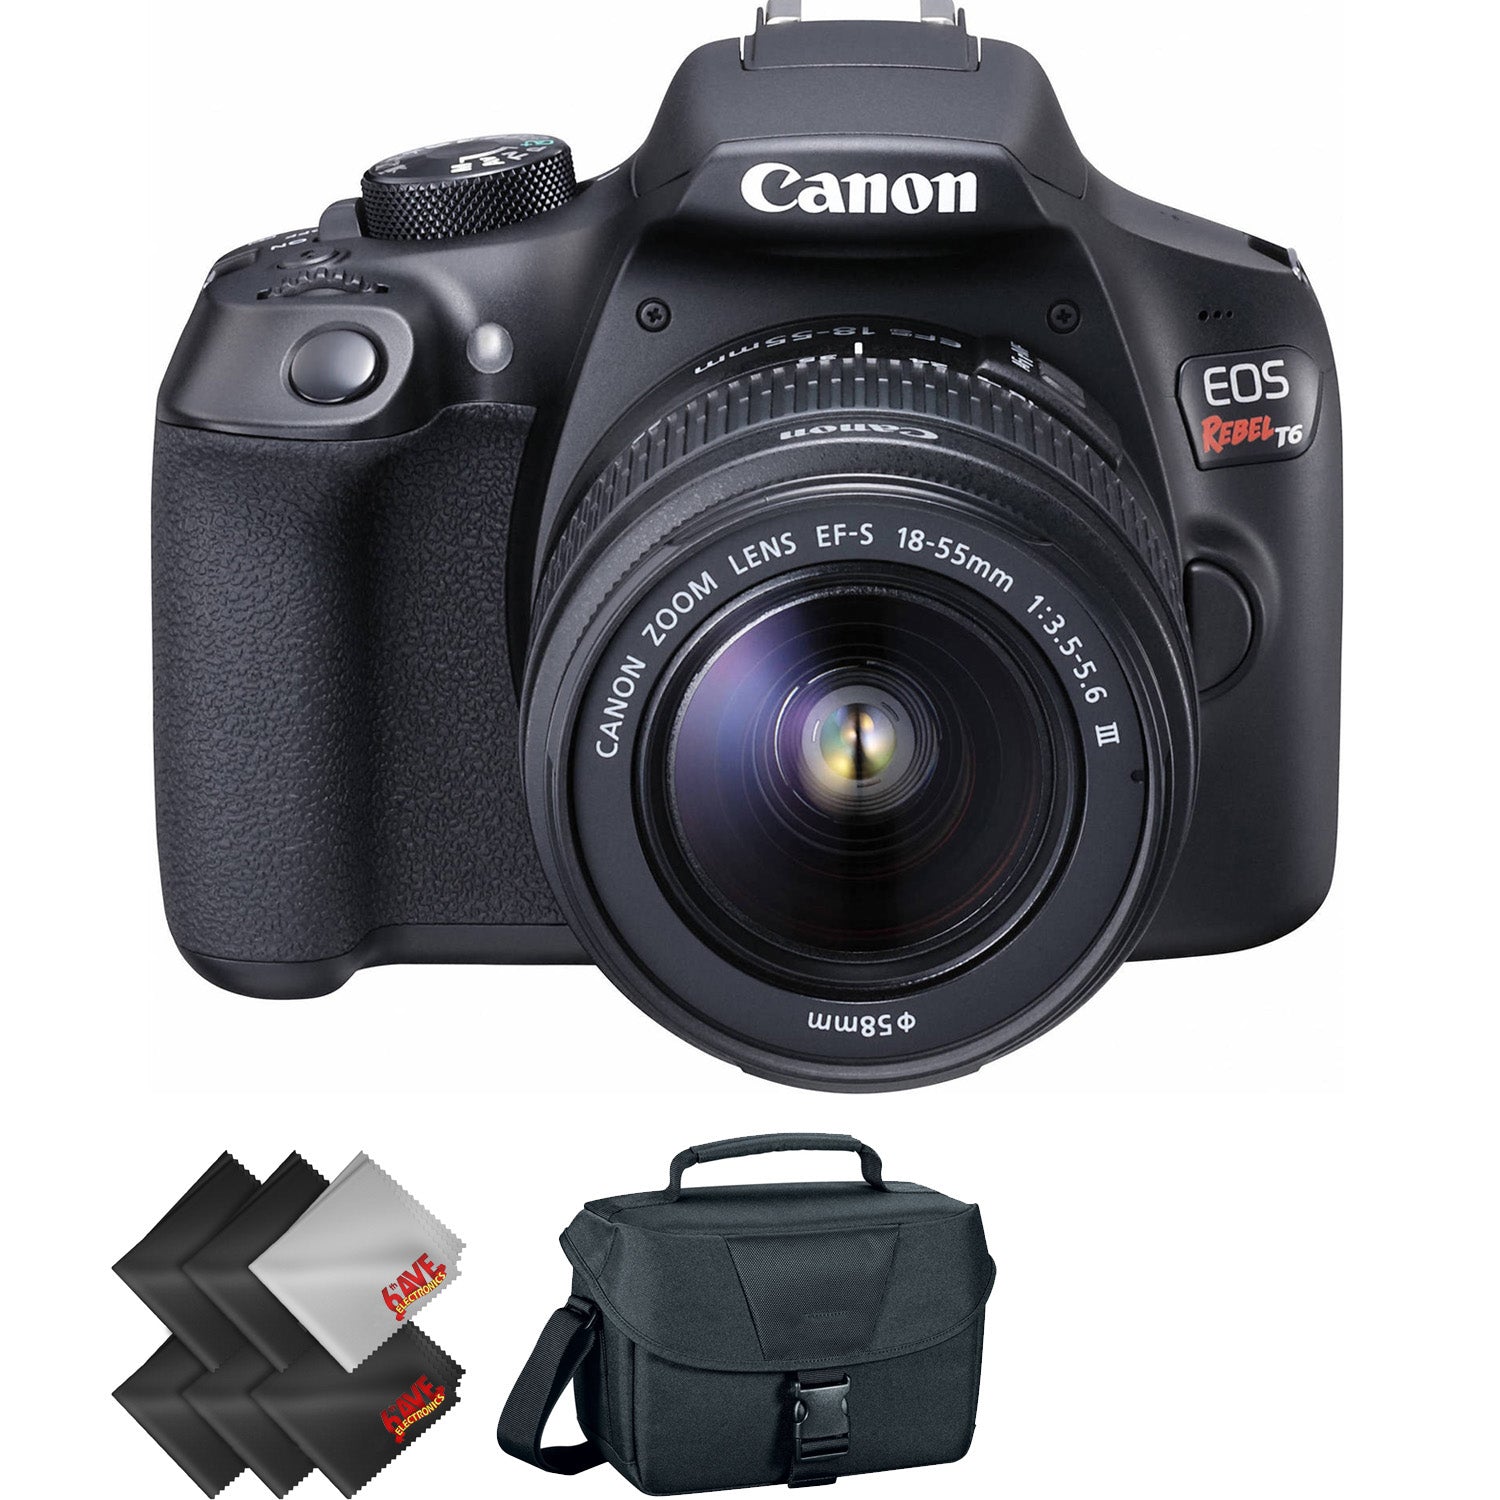 Canon EOS Rebel T6 DSLR Camera with 18-55mm and 75-300mm Lenses Kit + 2 Year Accidental Warranty Bundle